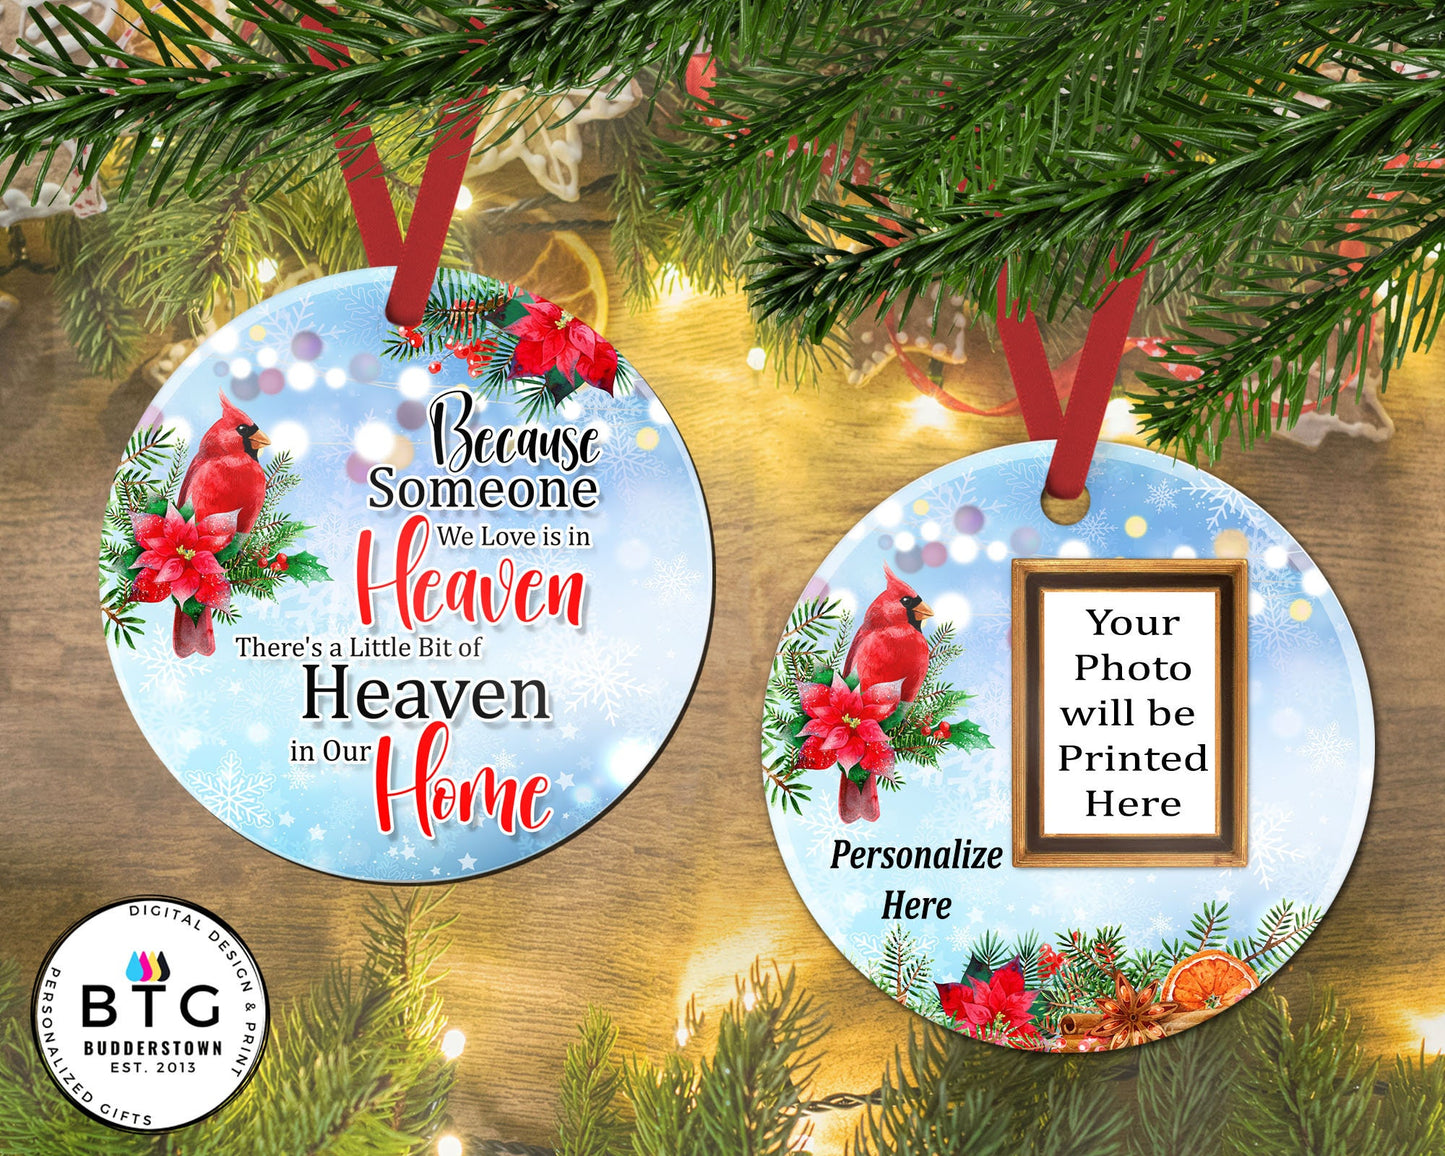 Because someone we love is in heaven - Memorial Ornament, Cardinals, ornament with cardinal, memorial gift